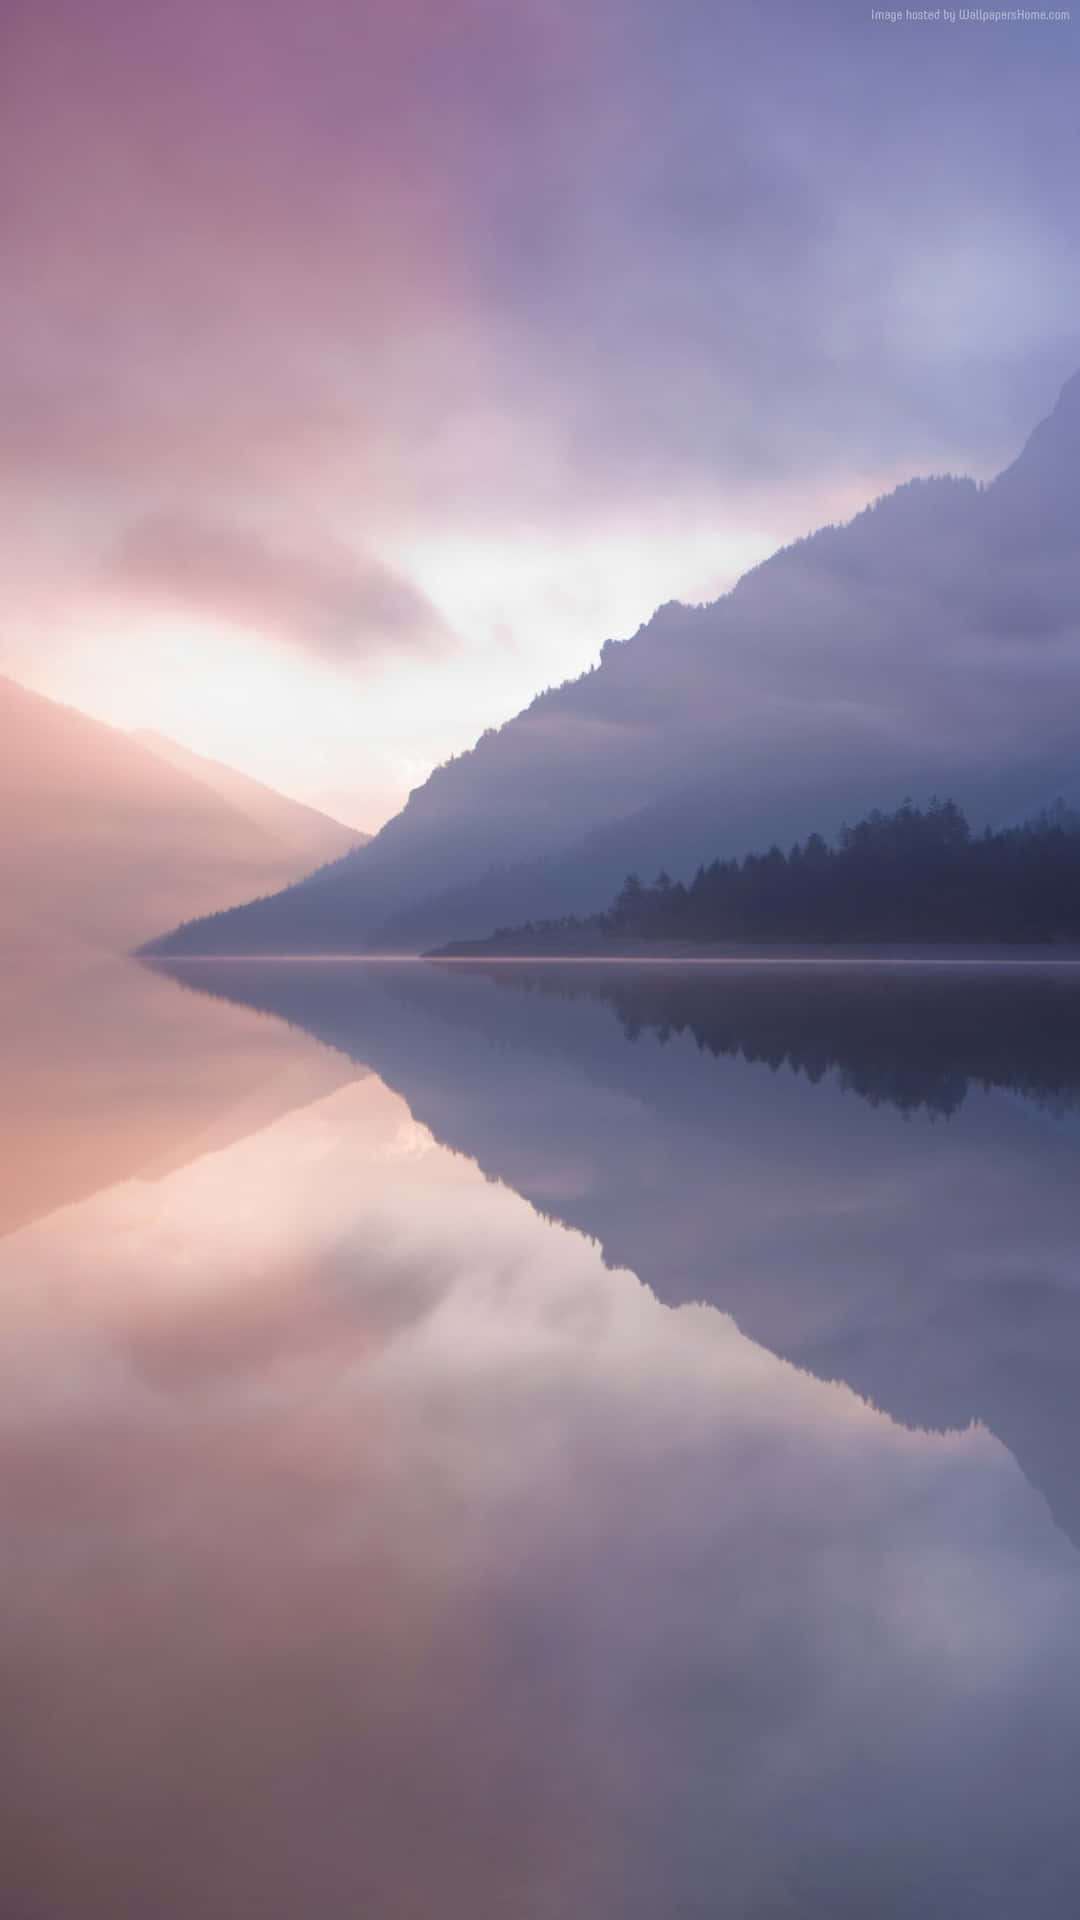 A Lake With Mountains And Fog Reflected In It